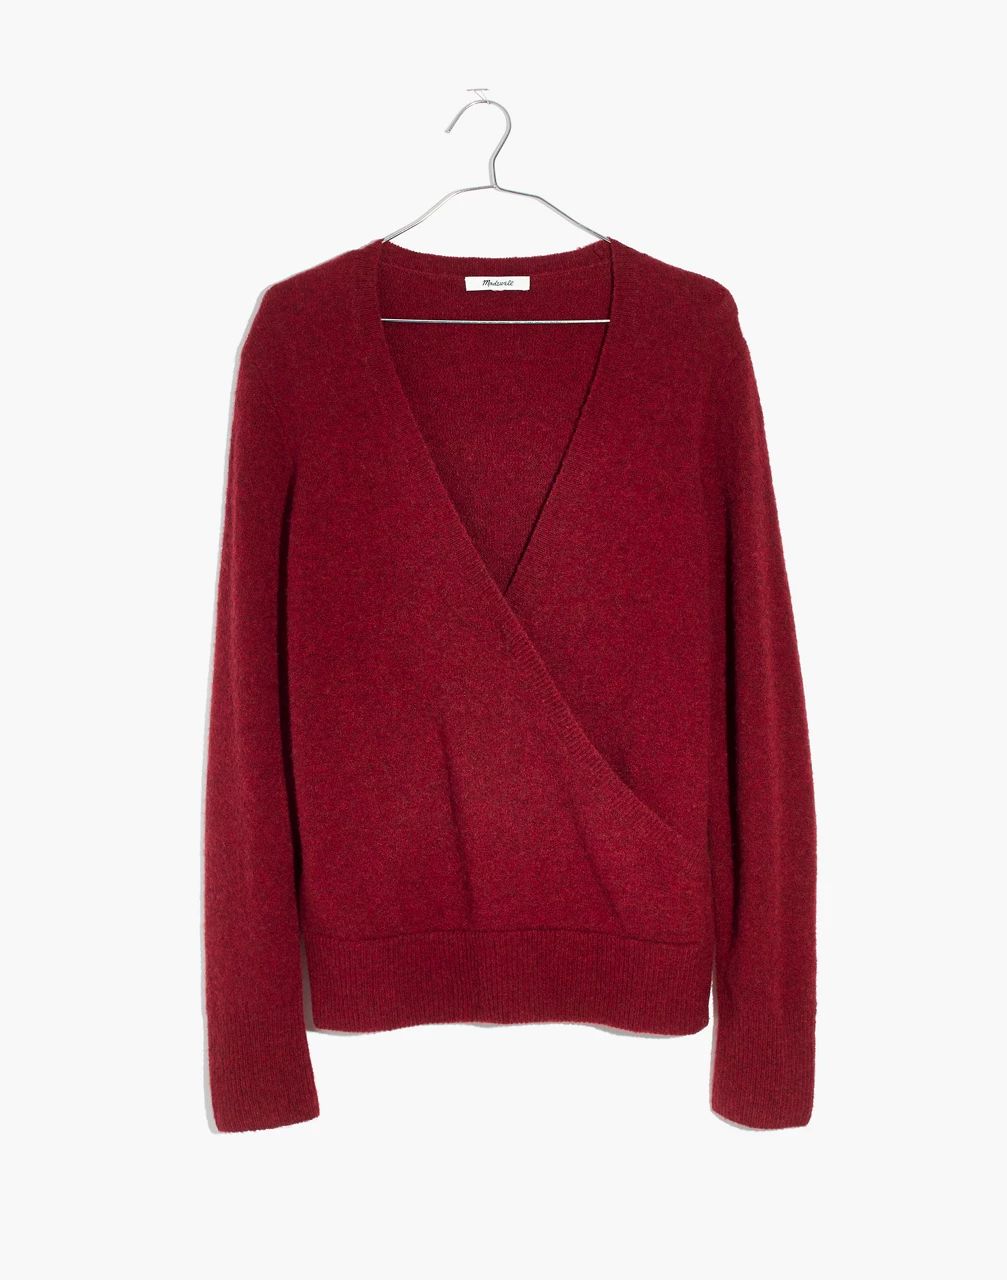 Wrap-Front Pullover Sweater in Coziest Yarn | Madewell